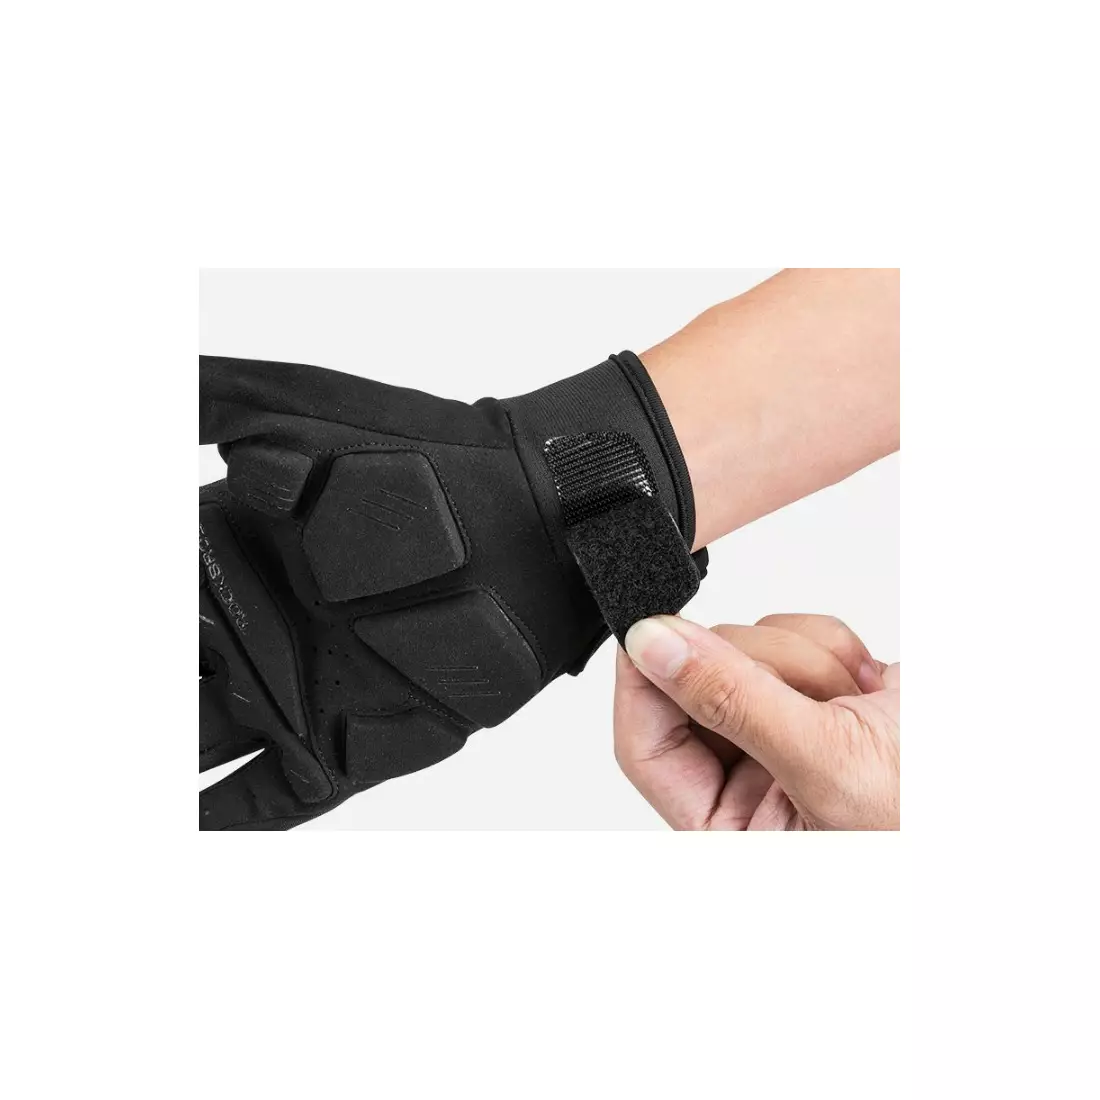 Rockbros transition gel gloves with protector S210BK